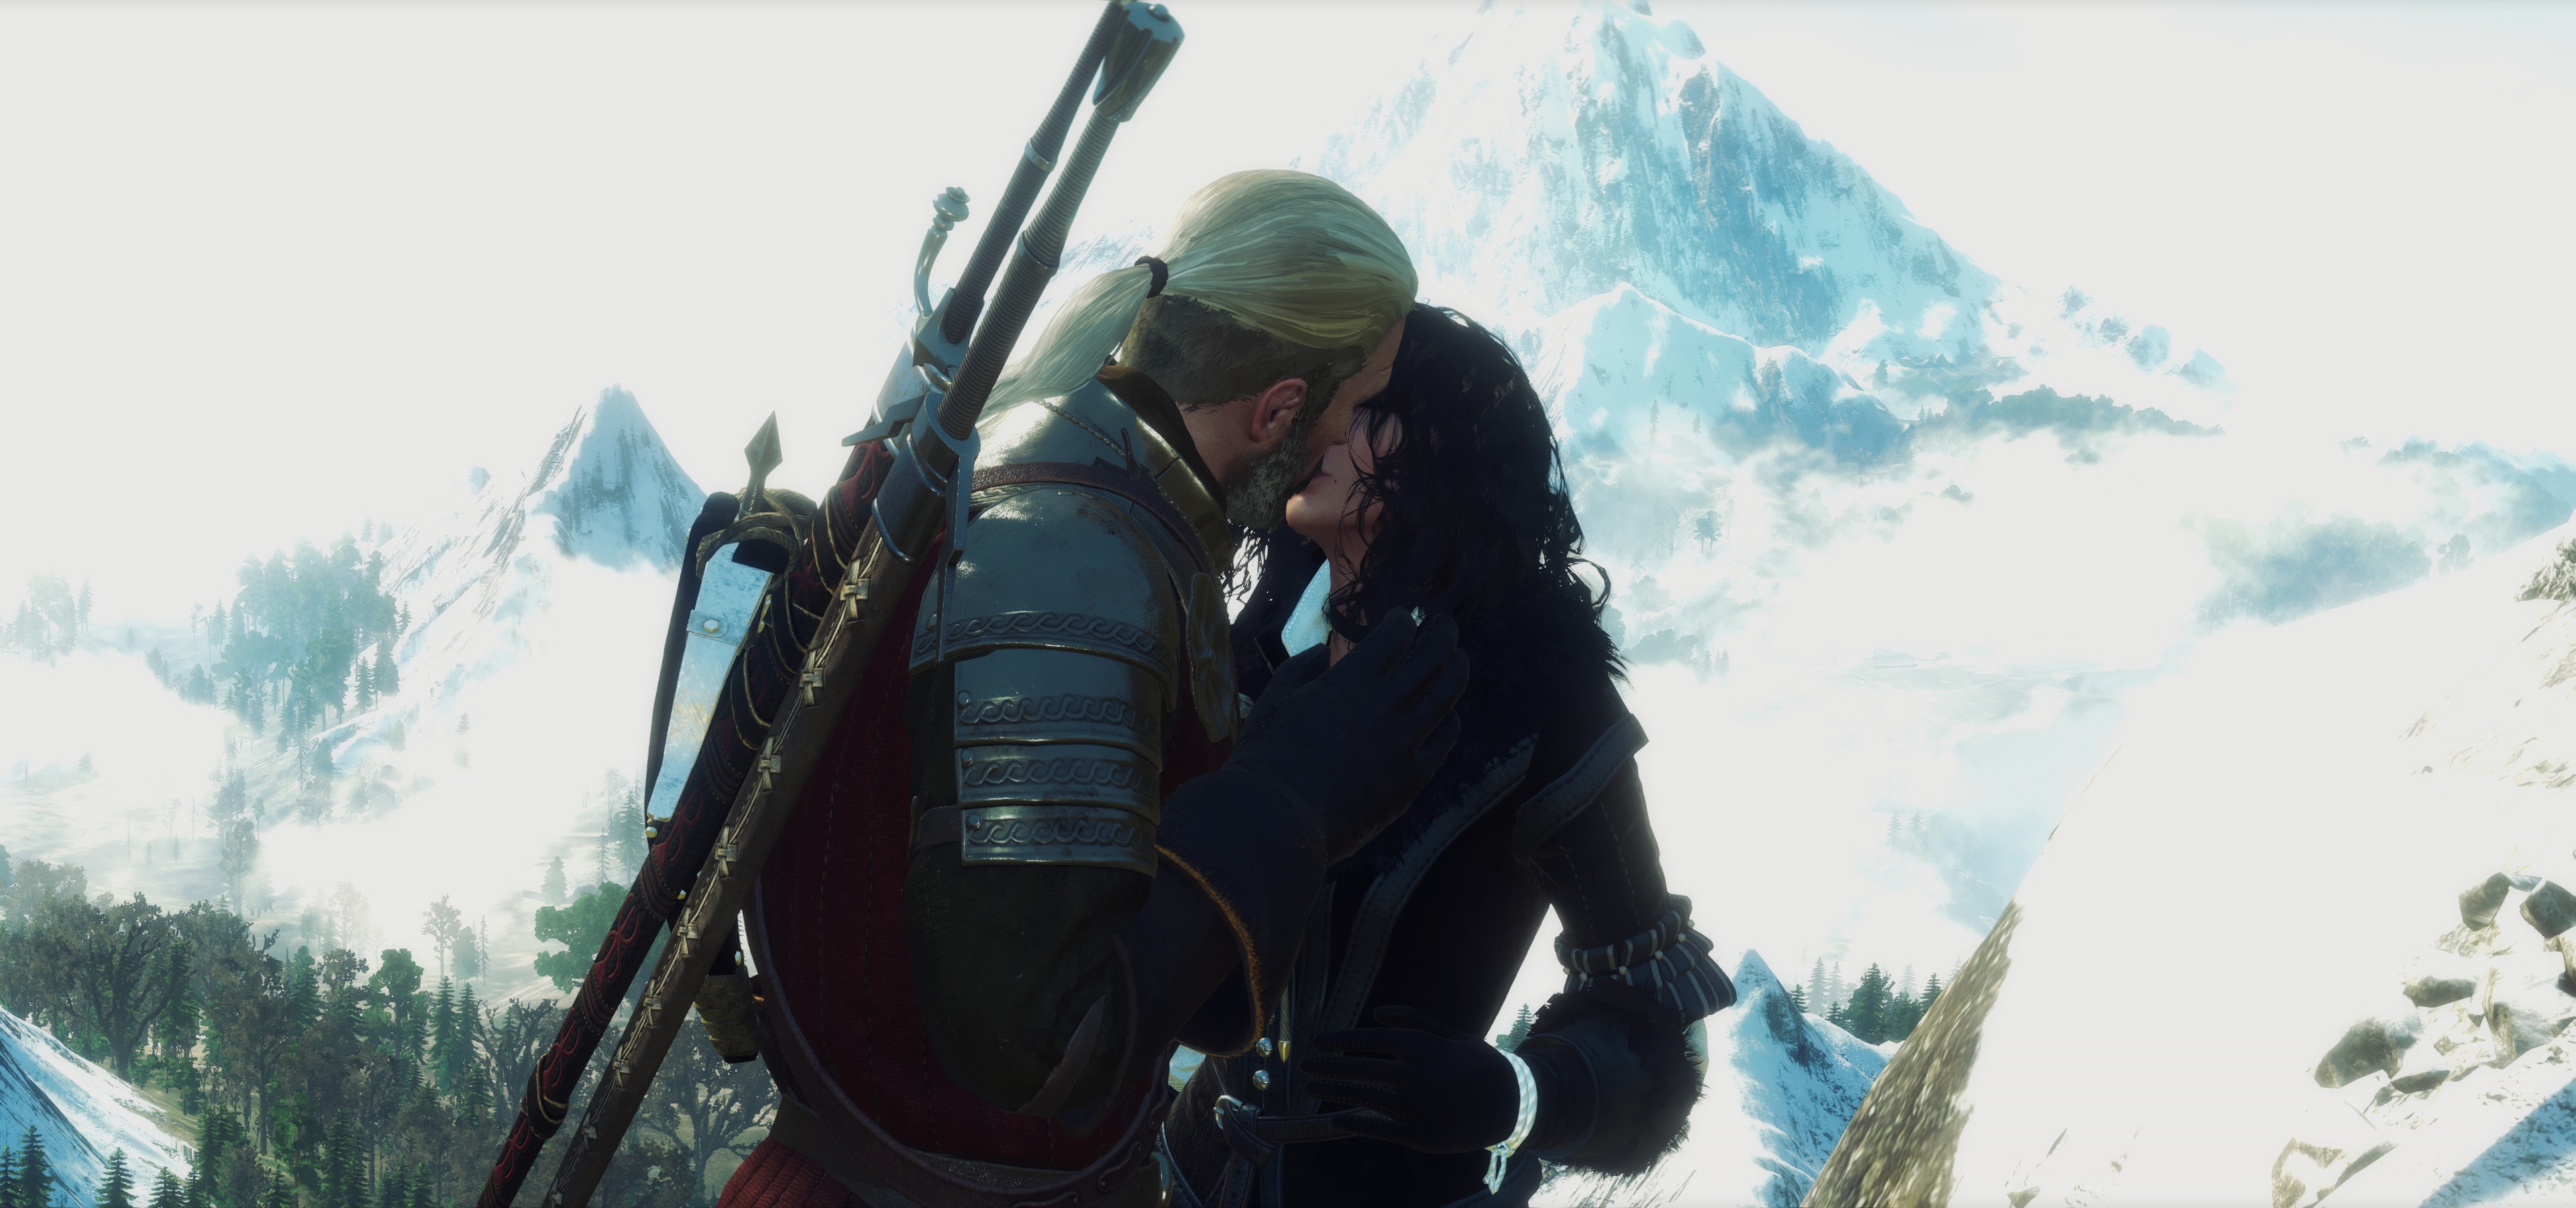 the witcher 3: wild hunt, video game, geralt of rivia, yennefer of vengerberg, the witcher